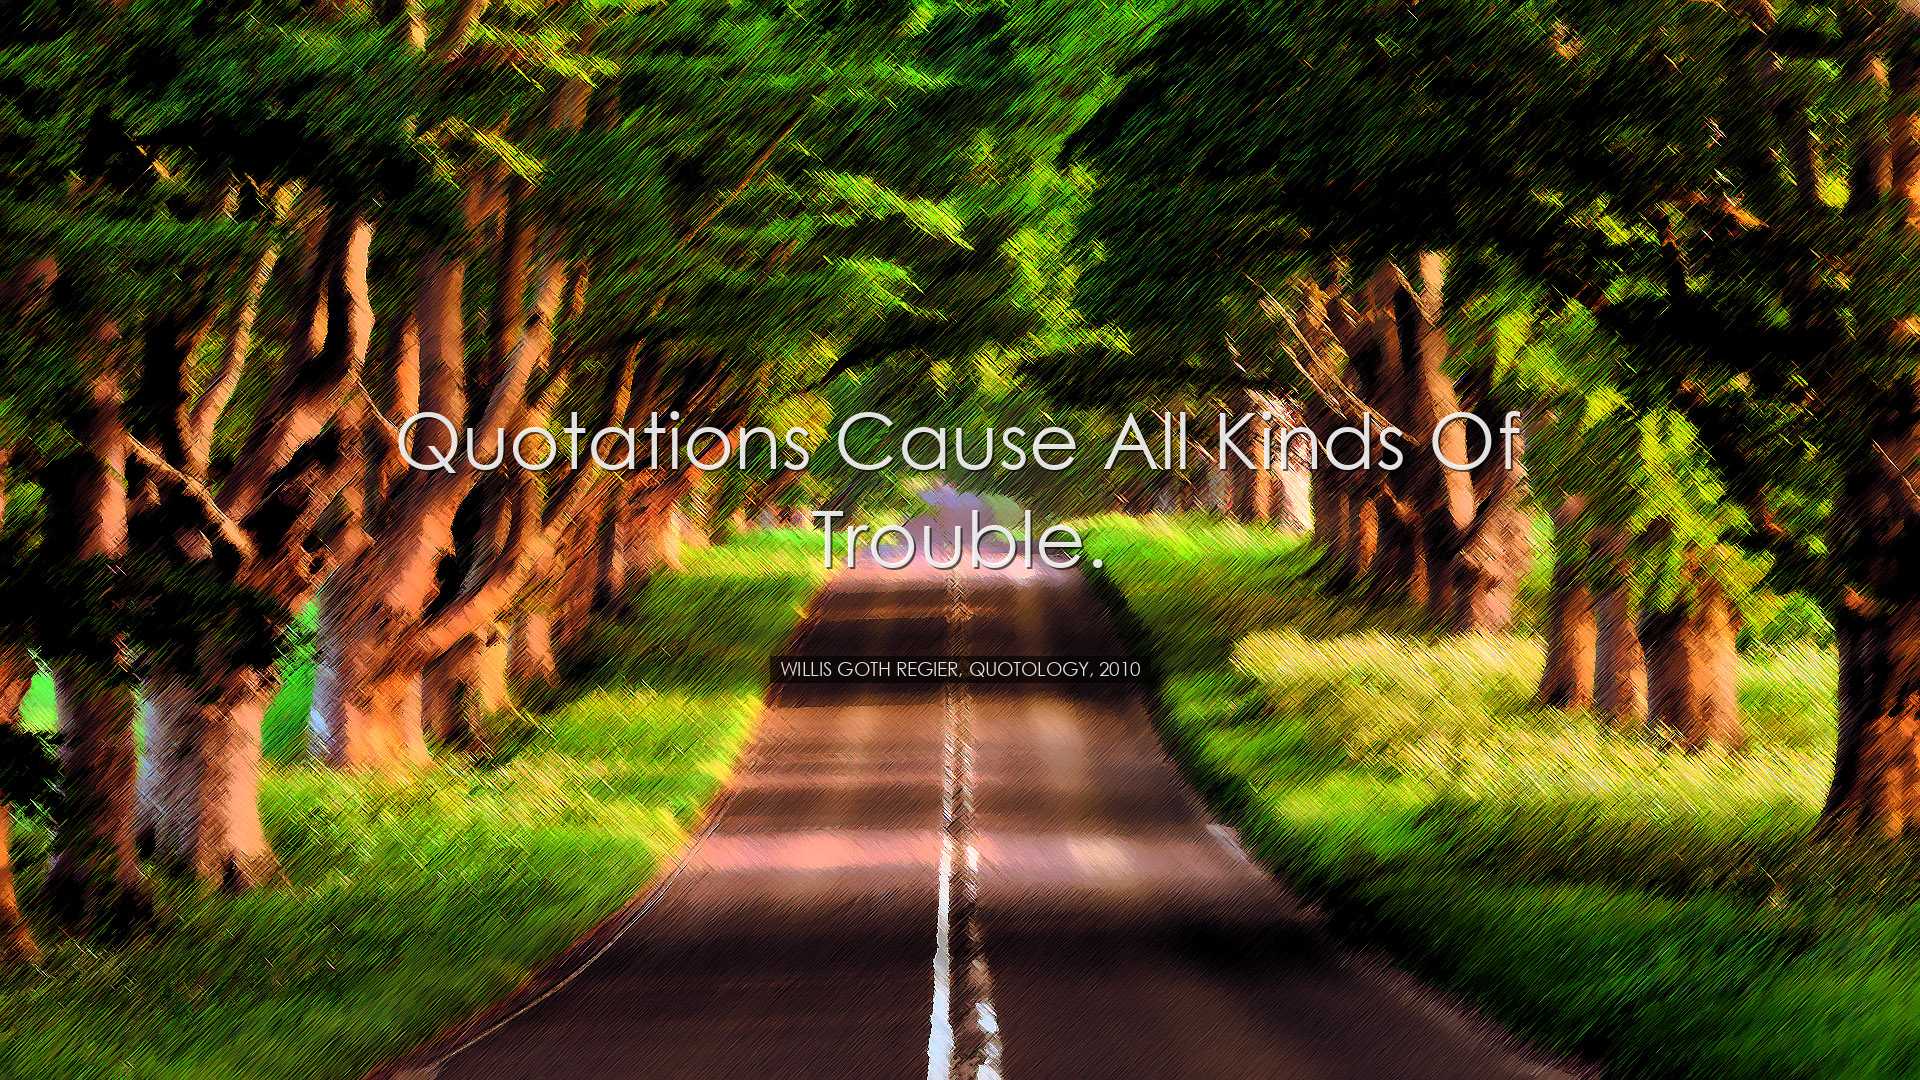 Quotations cause all kinds of trouble. - Willis Goth Regier, Quoto